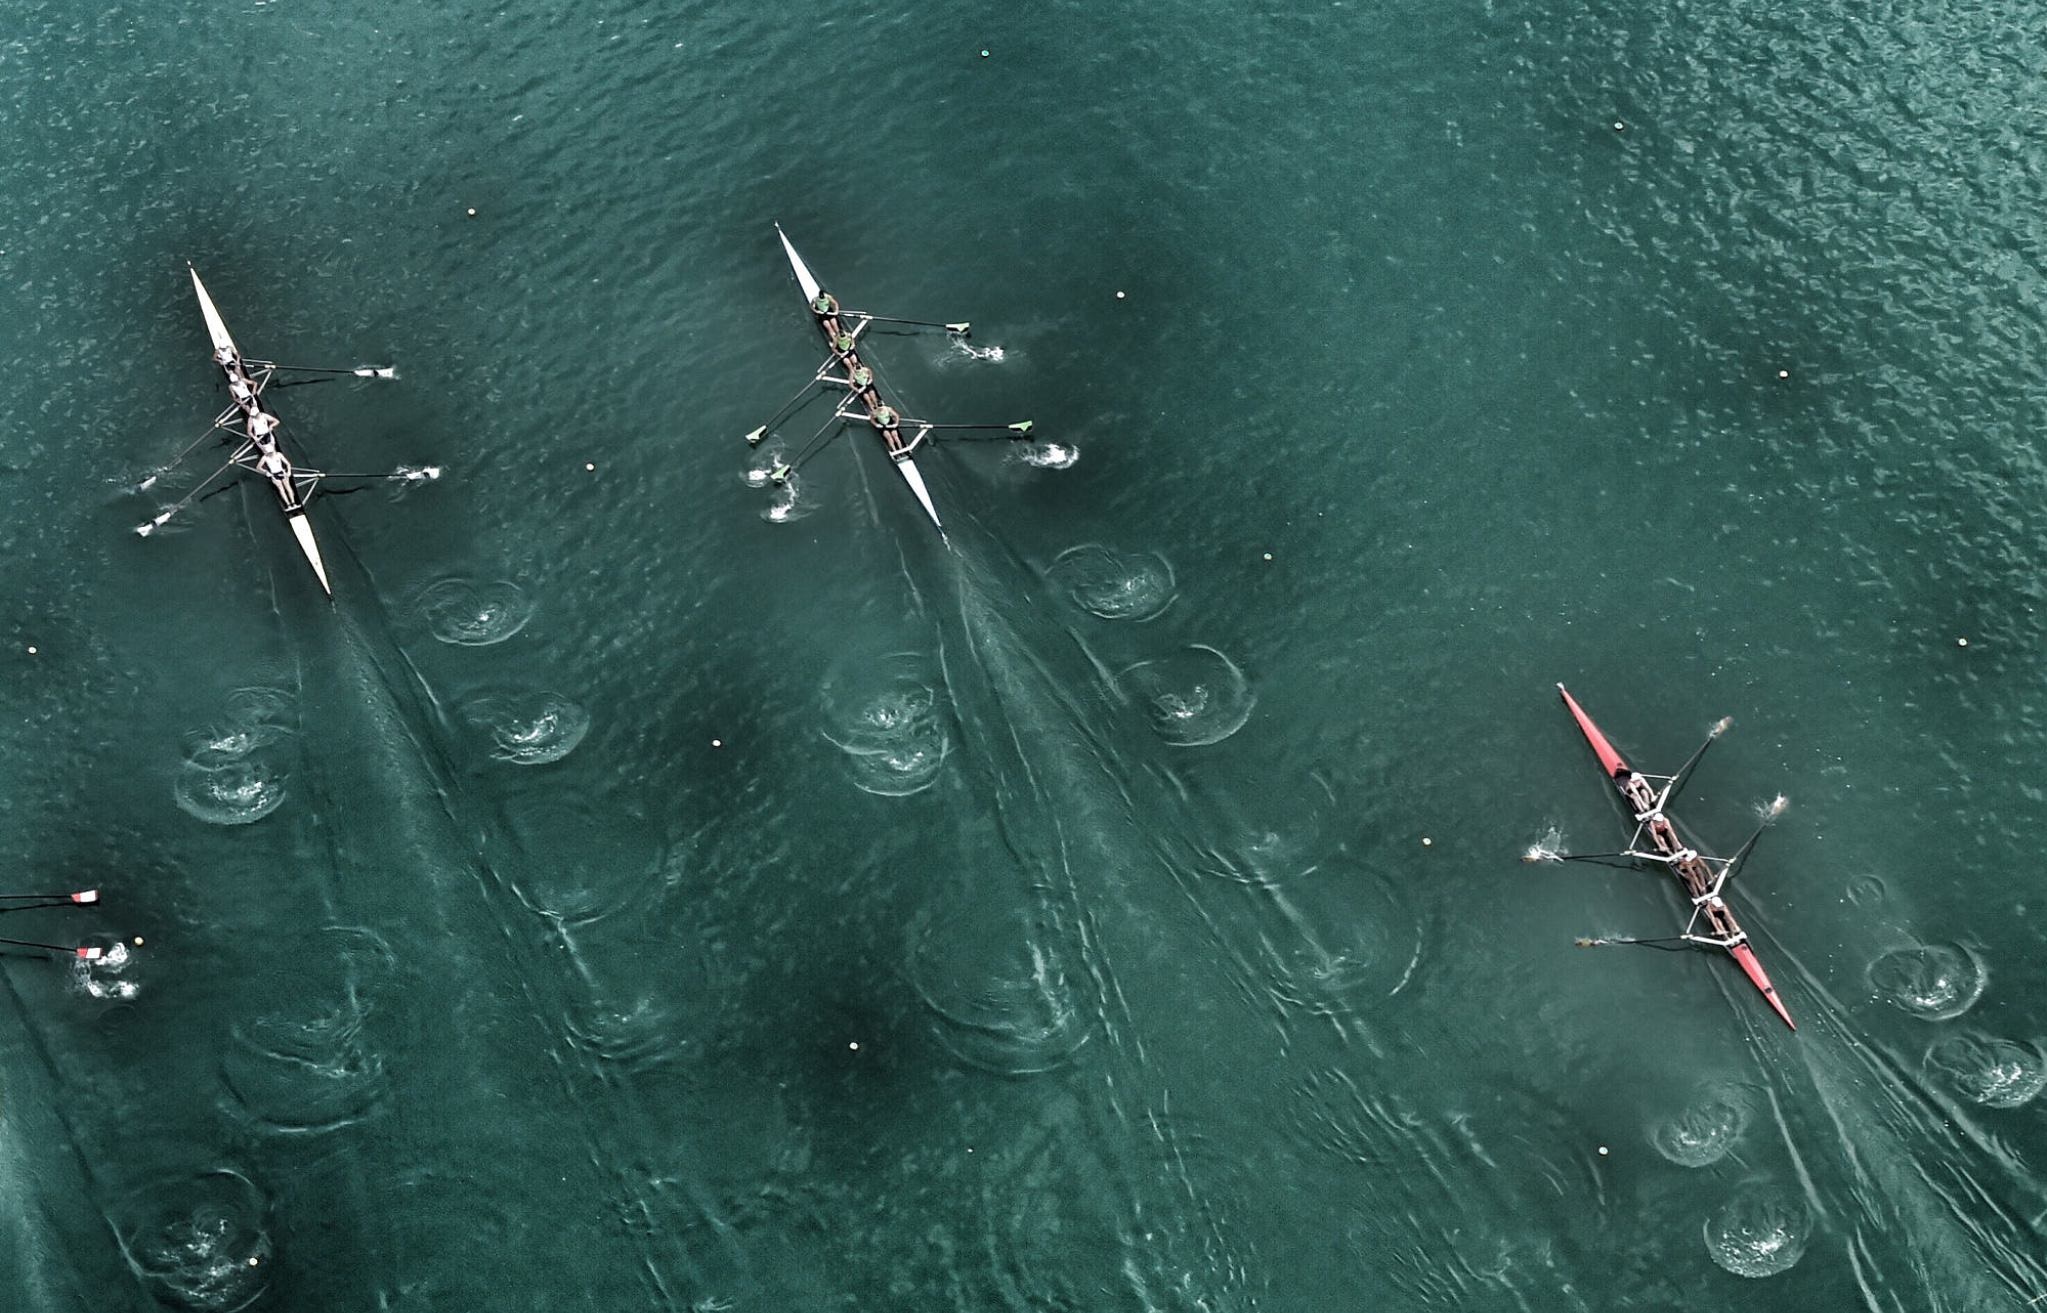 Rowing: A group sweep pulling event, Competitive boating, Racing on the water. 2050x1320 HD Wallpaper.